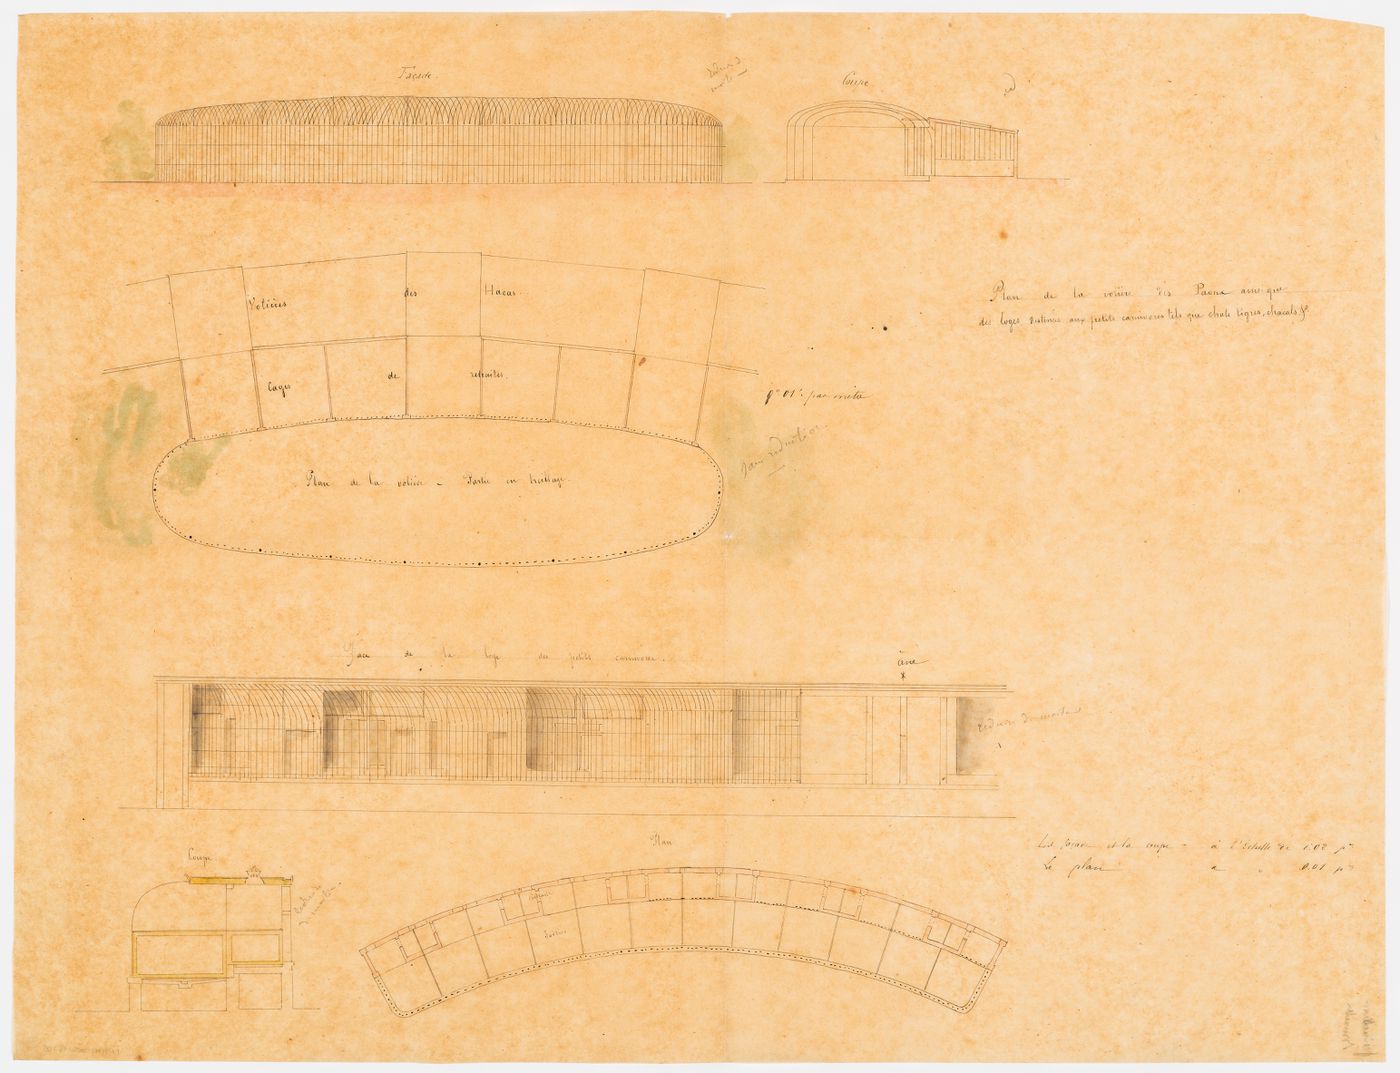 Zoological garden, Brussels: Elevations, plans, and sections of the small carnivore cage and an aviary